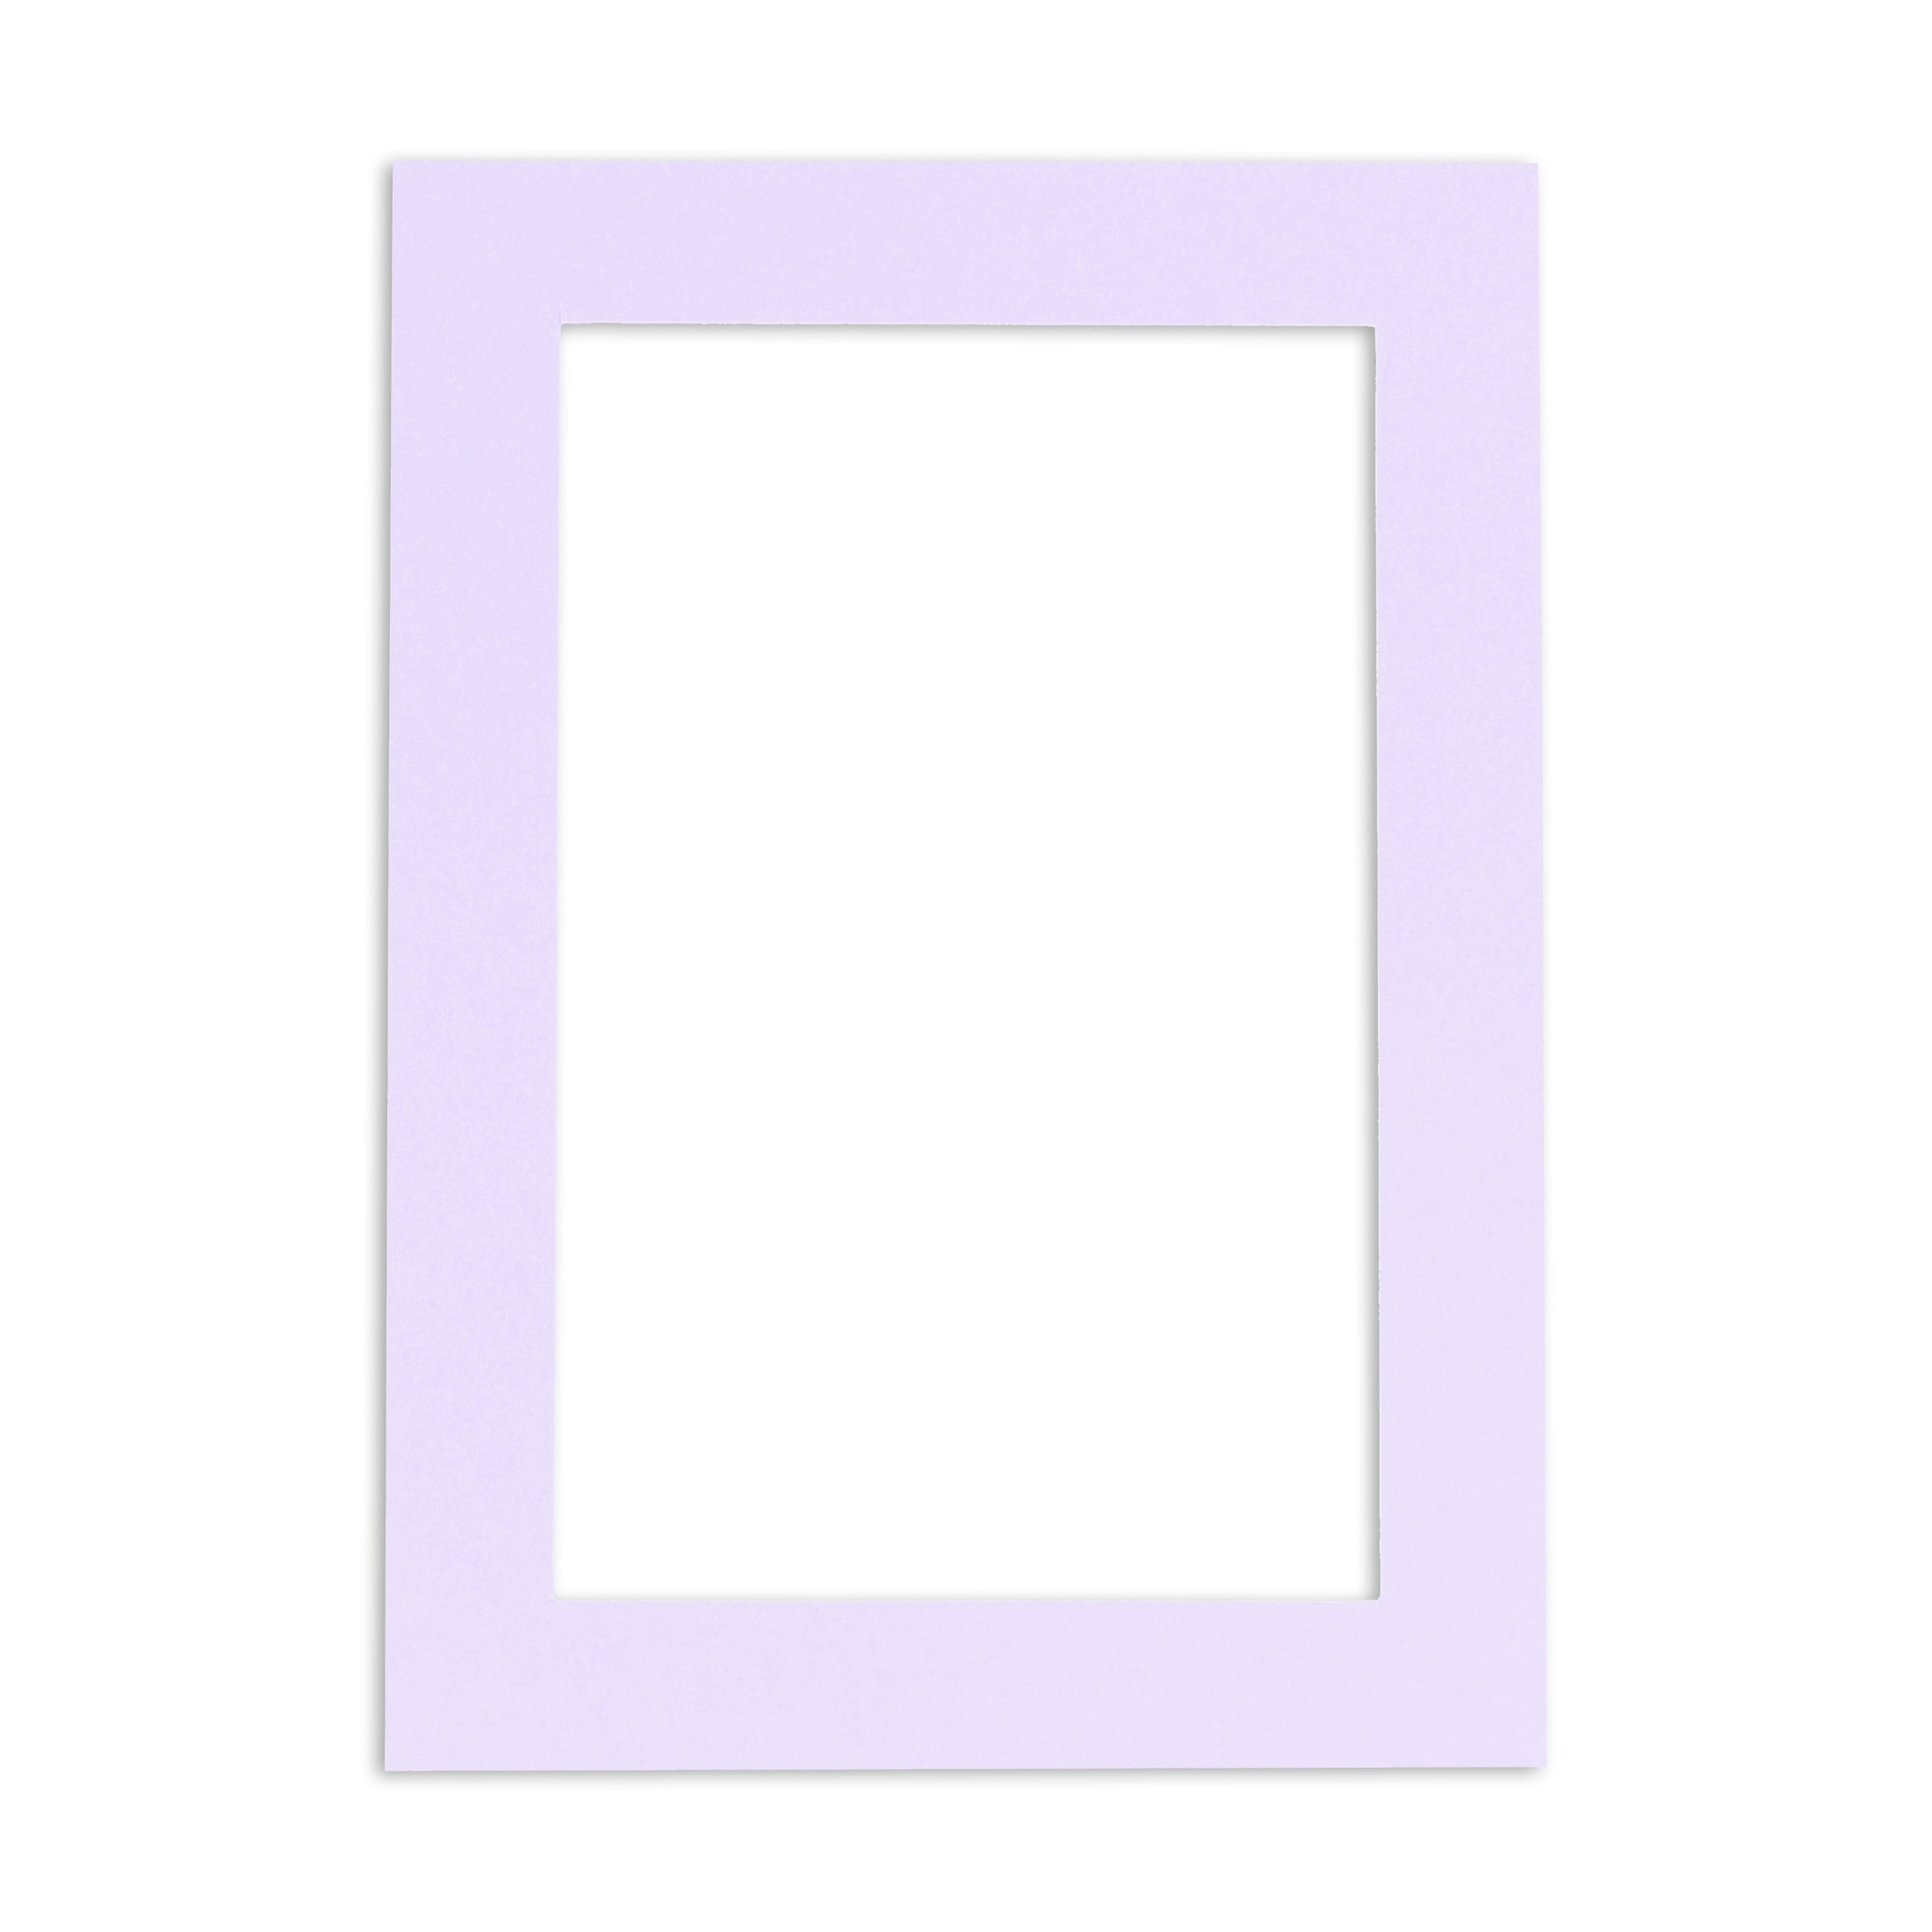 18x24 Mat for 13x19 Photo - Baby Blue Matboard for Frames